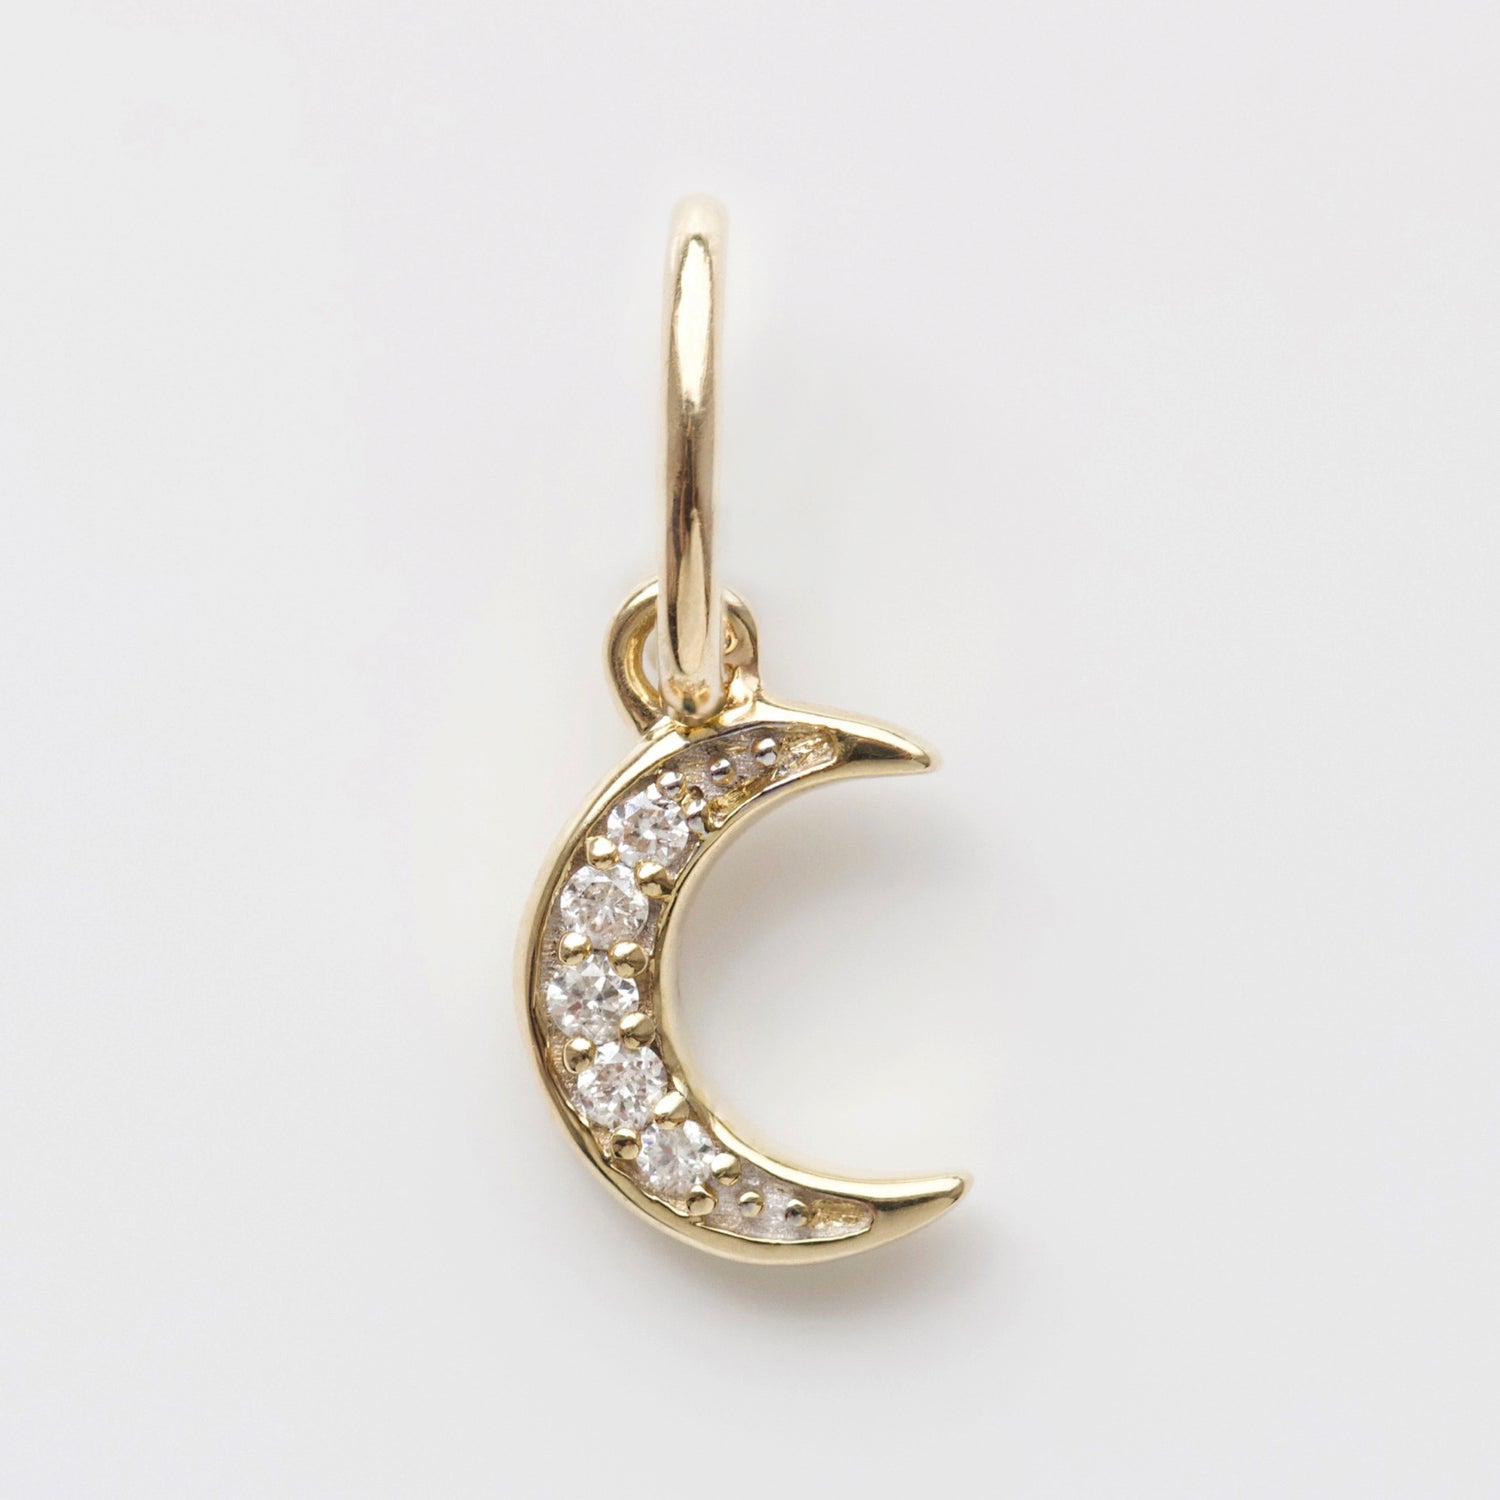 Crescent moon diamond charm in solid gold